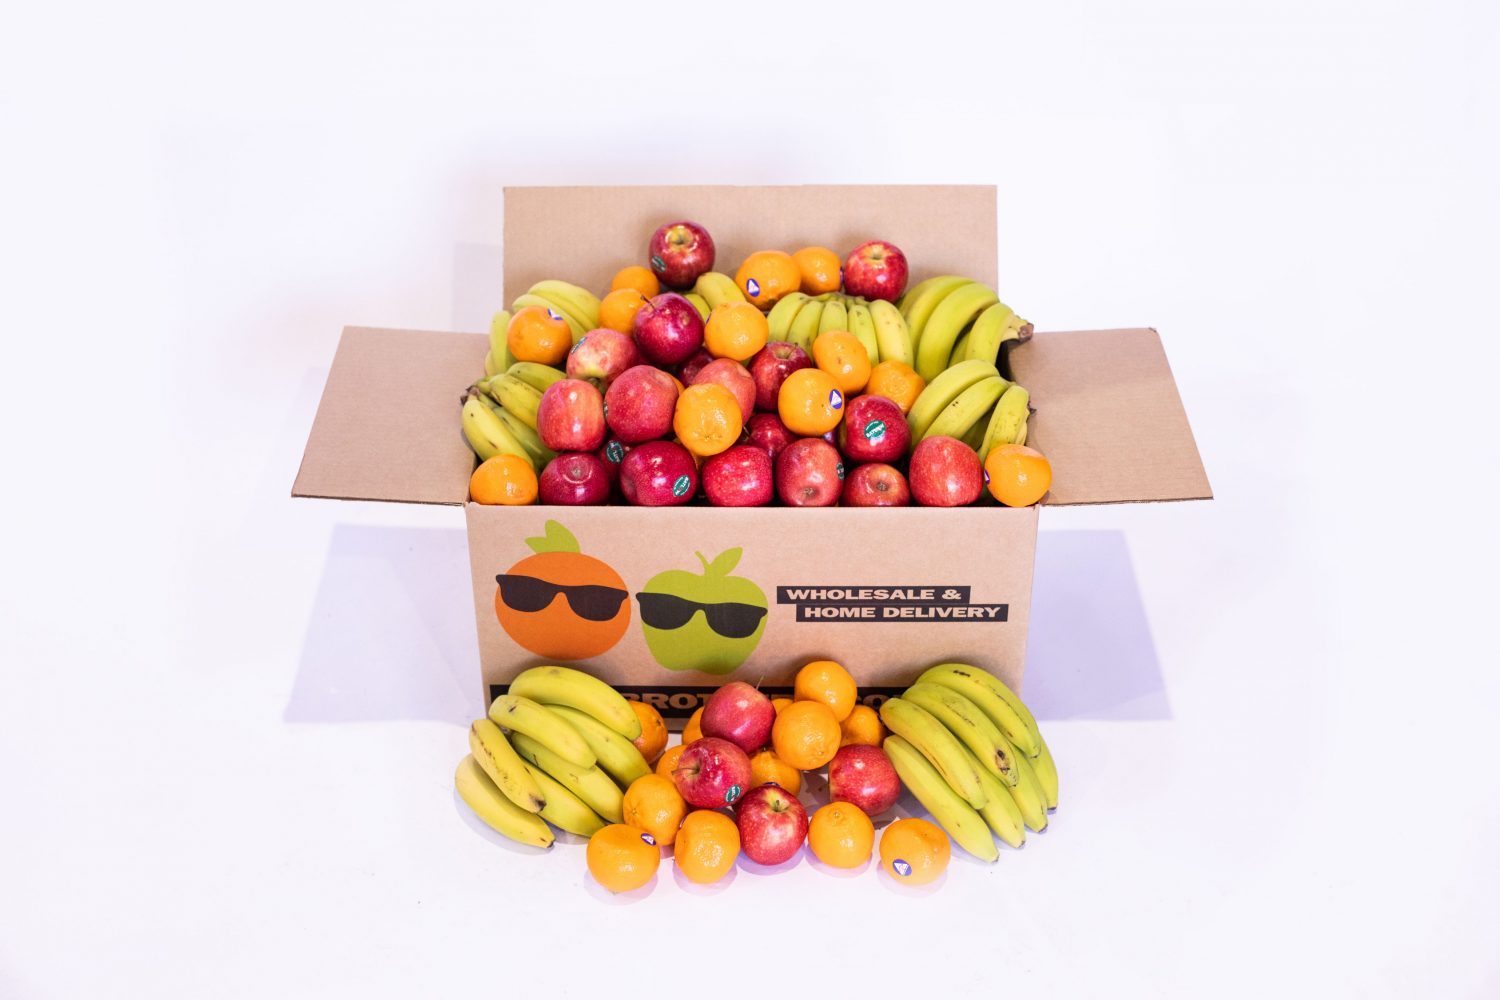 OFFICE - Fruit Box $60 2 week subscription - FRUIT BROTHERS